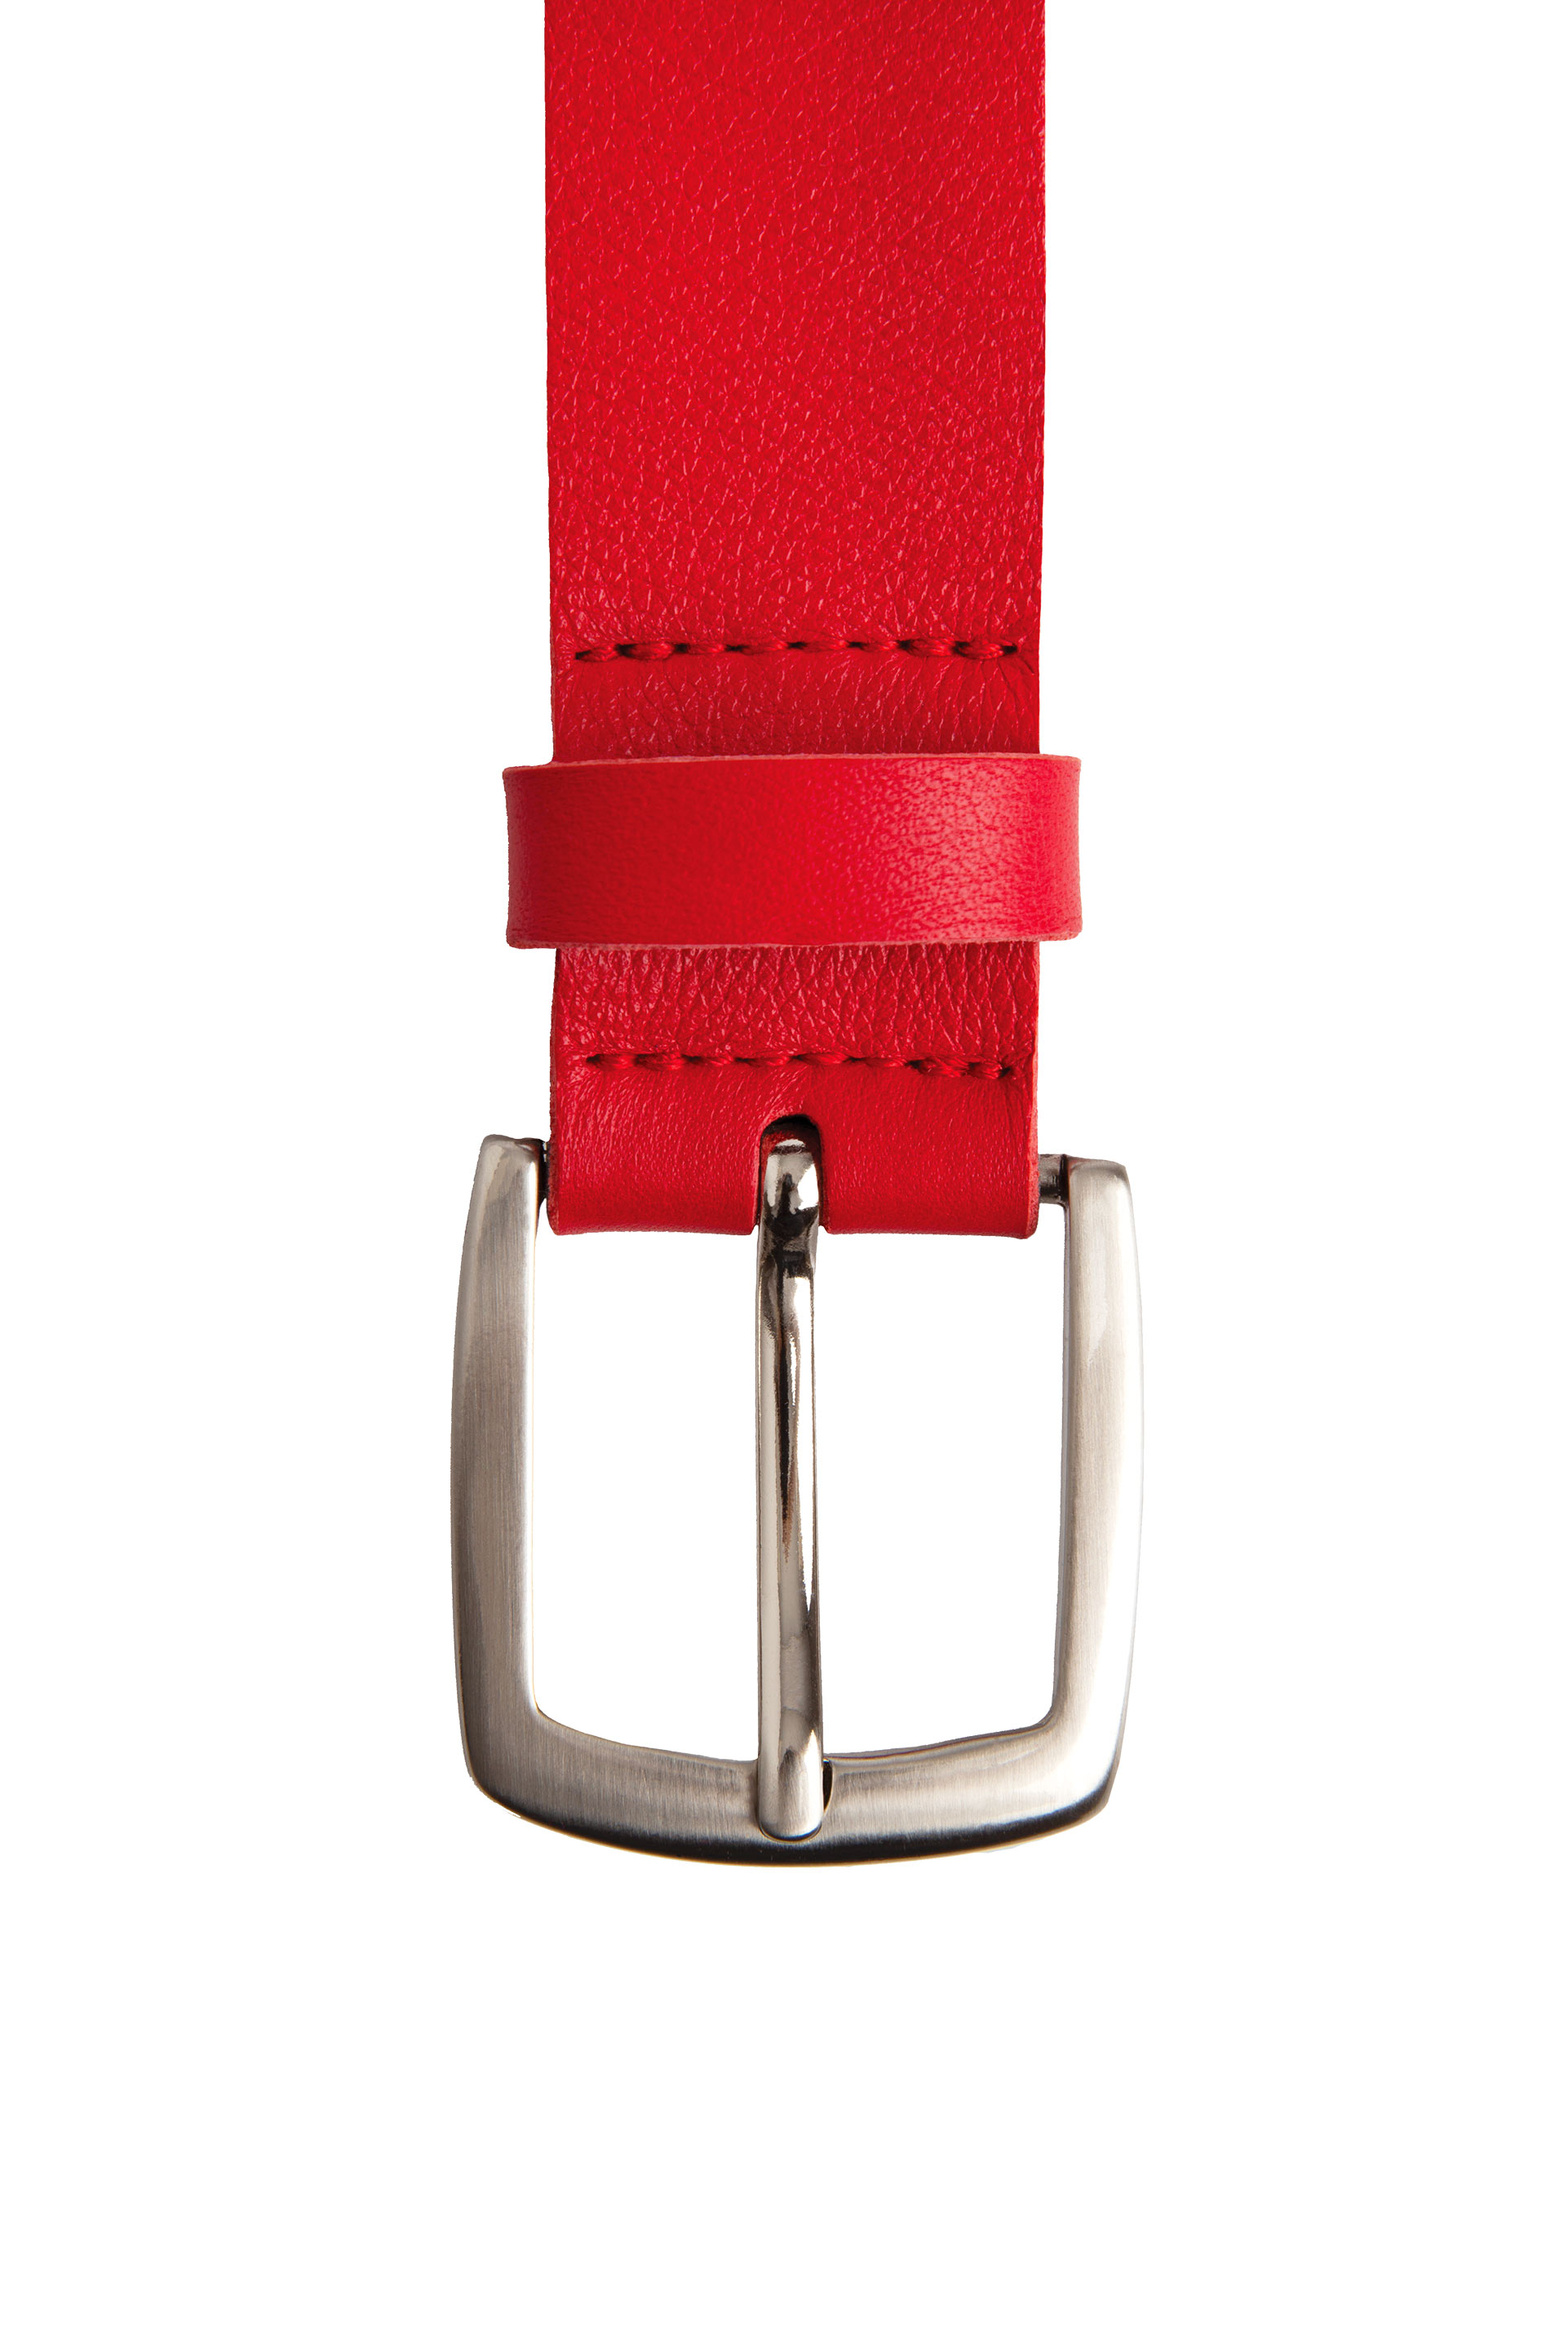 be100_leather_belt_red_cutout.jpg